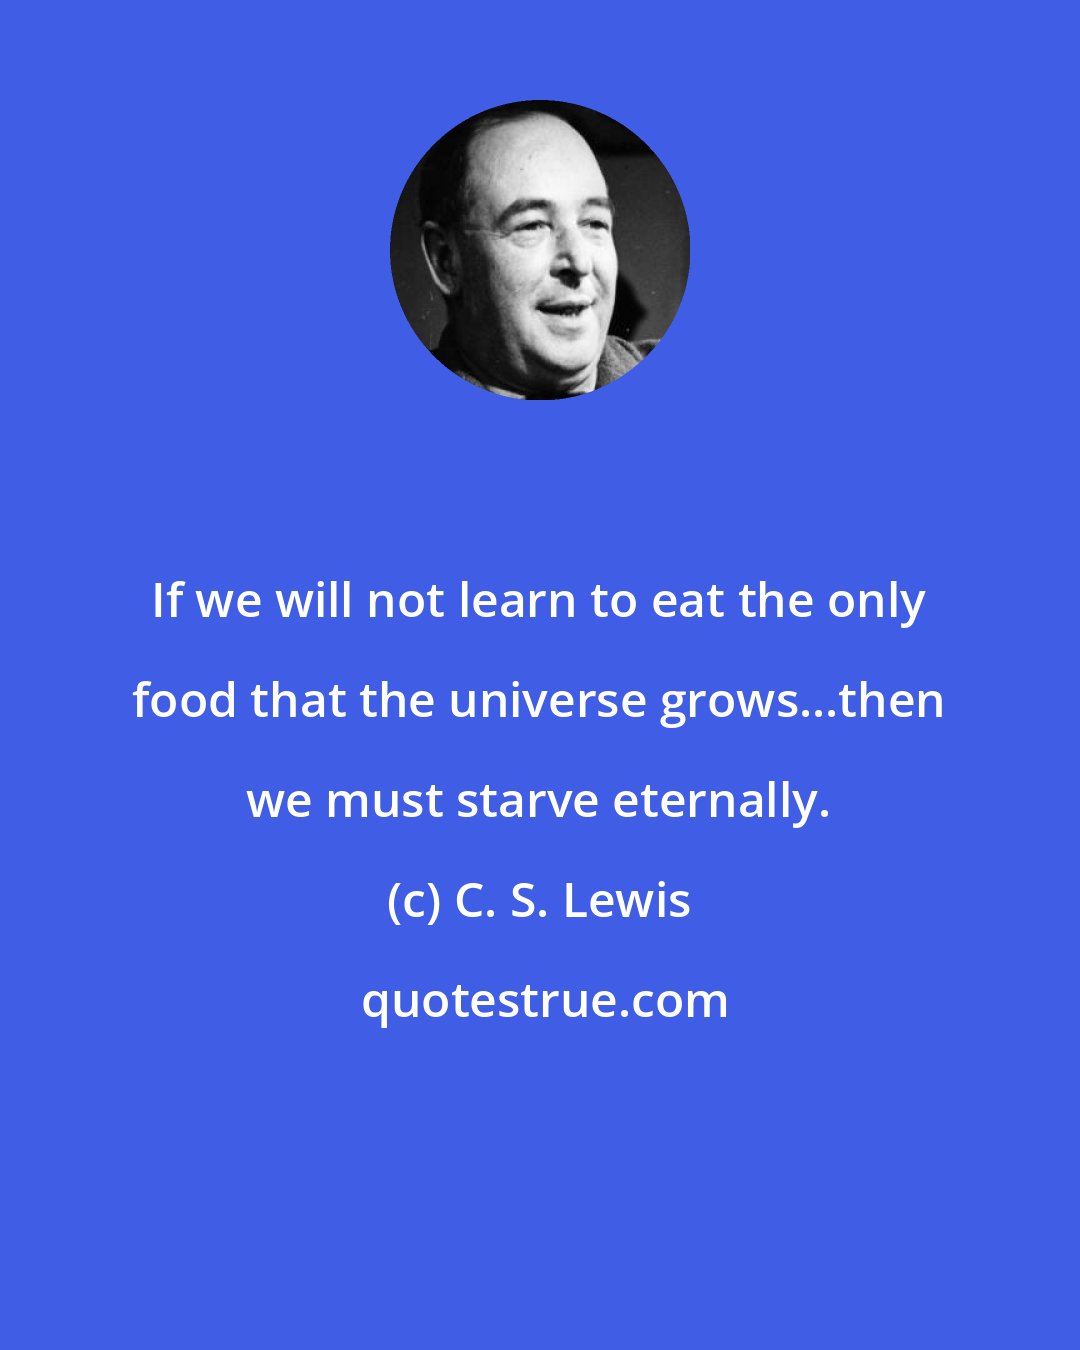 C. S. Lewis: If we will not learn to eat the only food that the universe grows...then we must starve eternally.